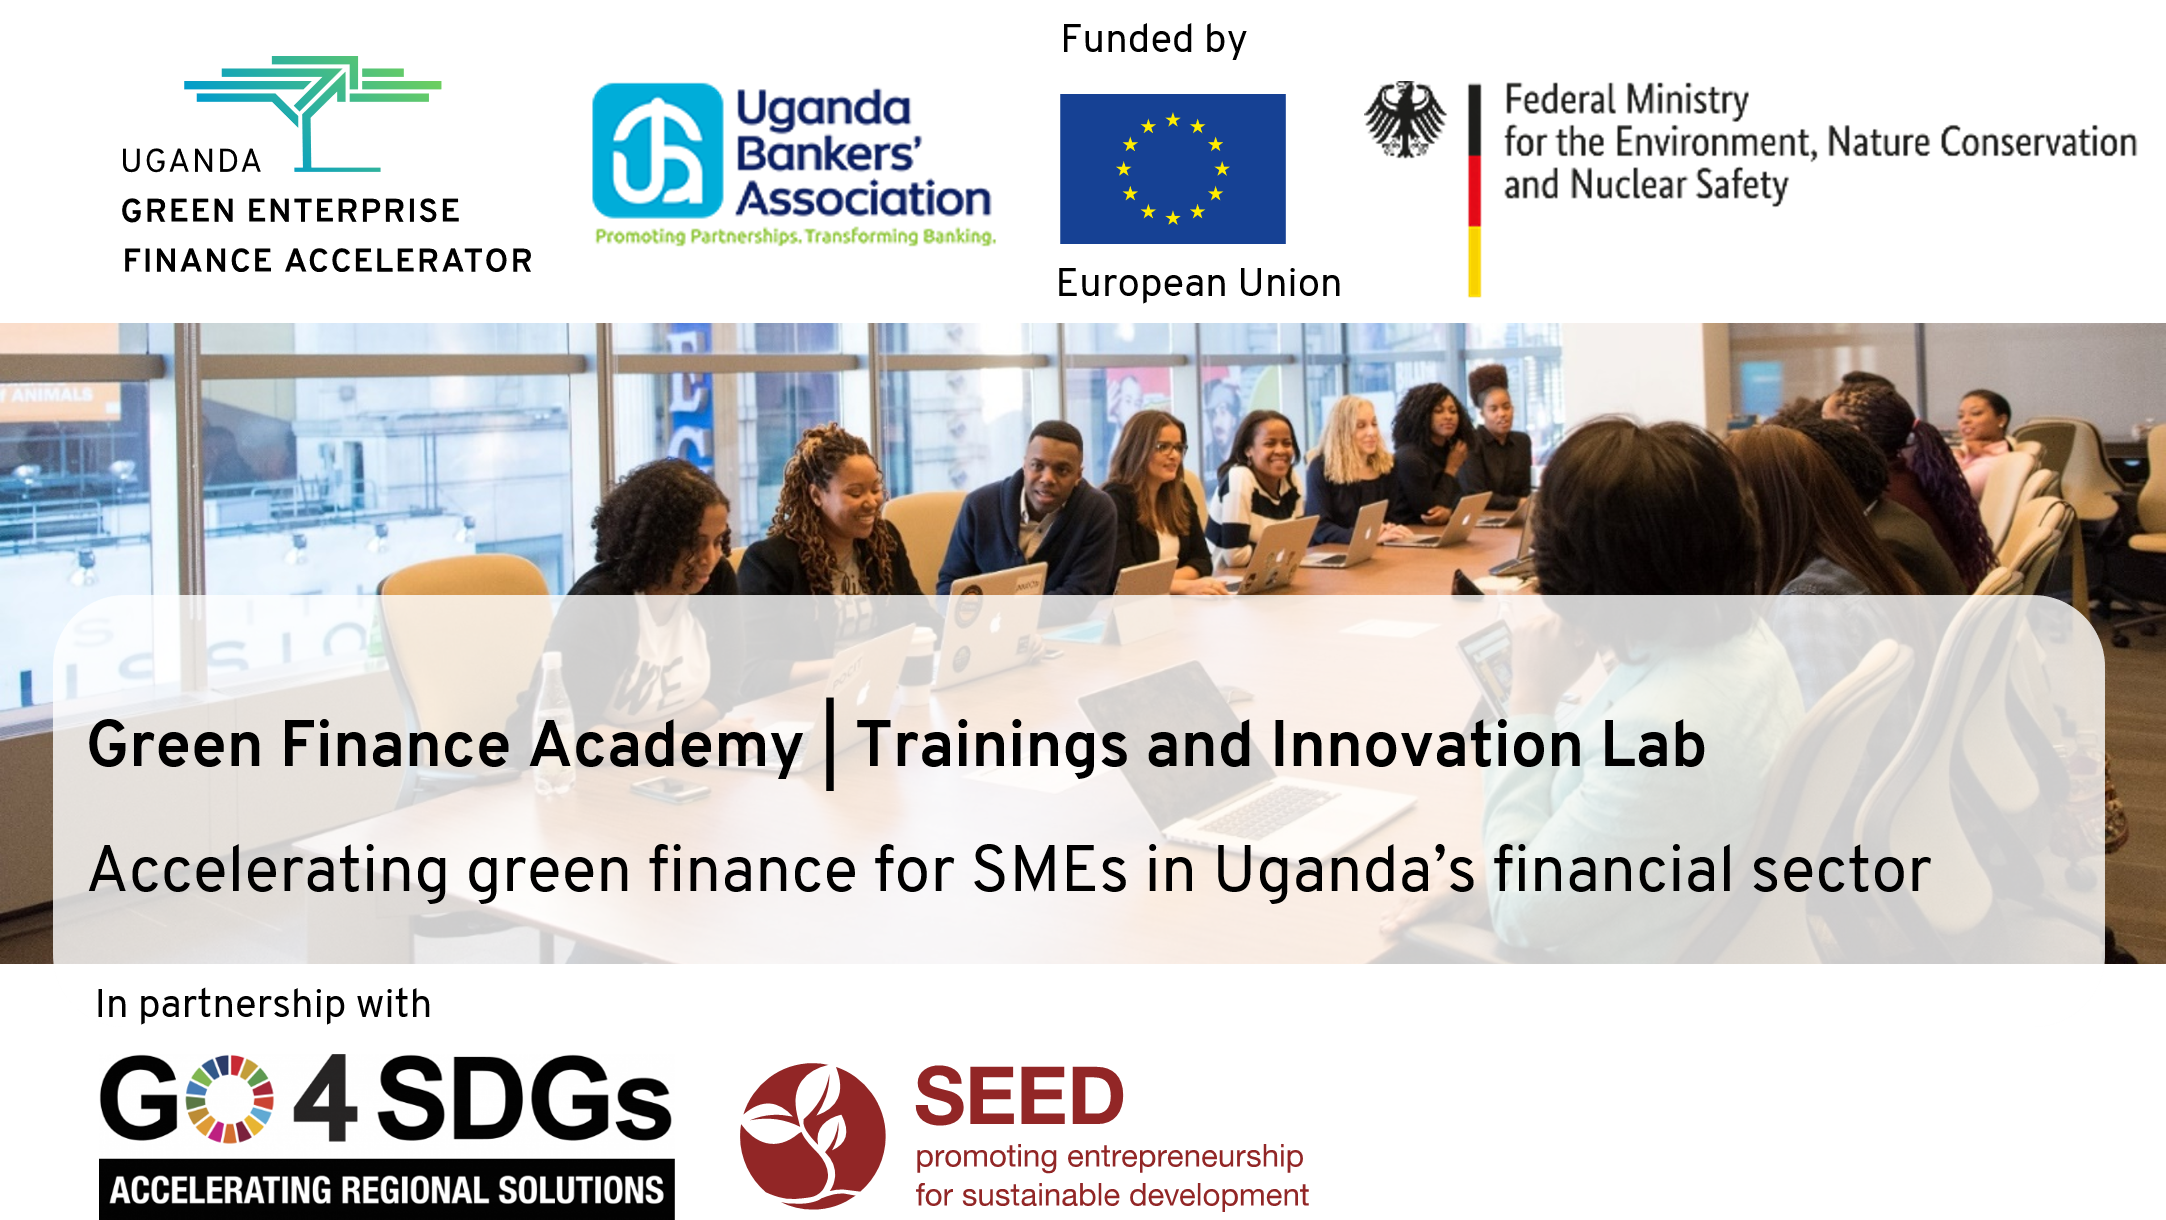 Green Finance Academy | Trainings with innovation lab